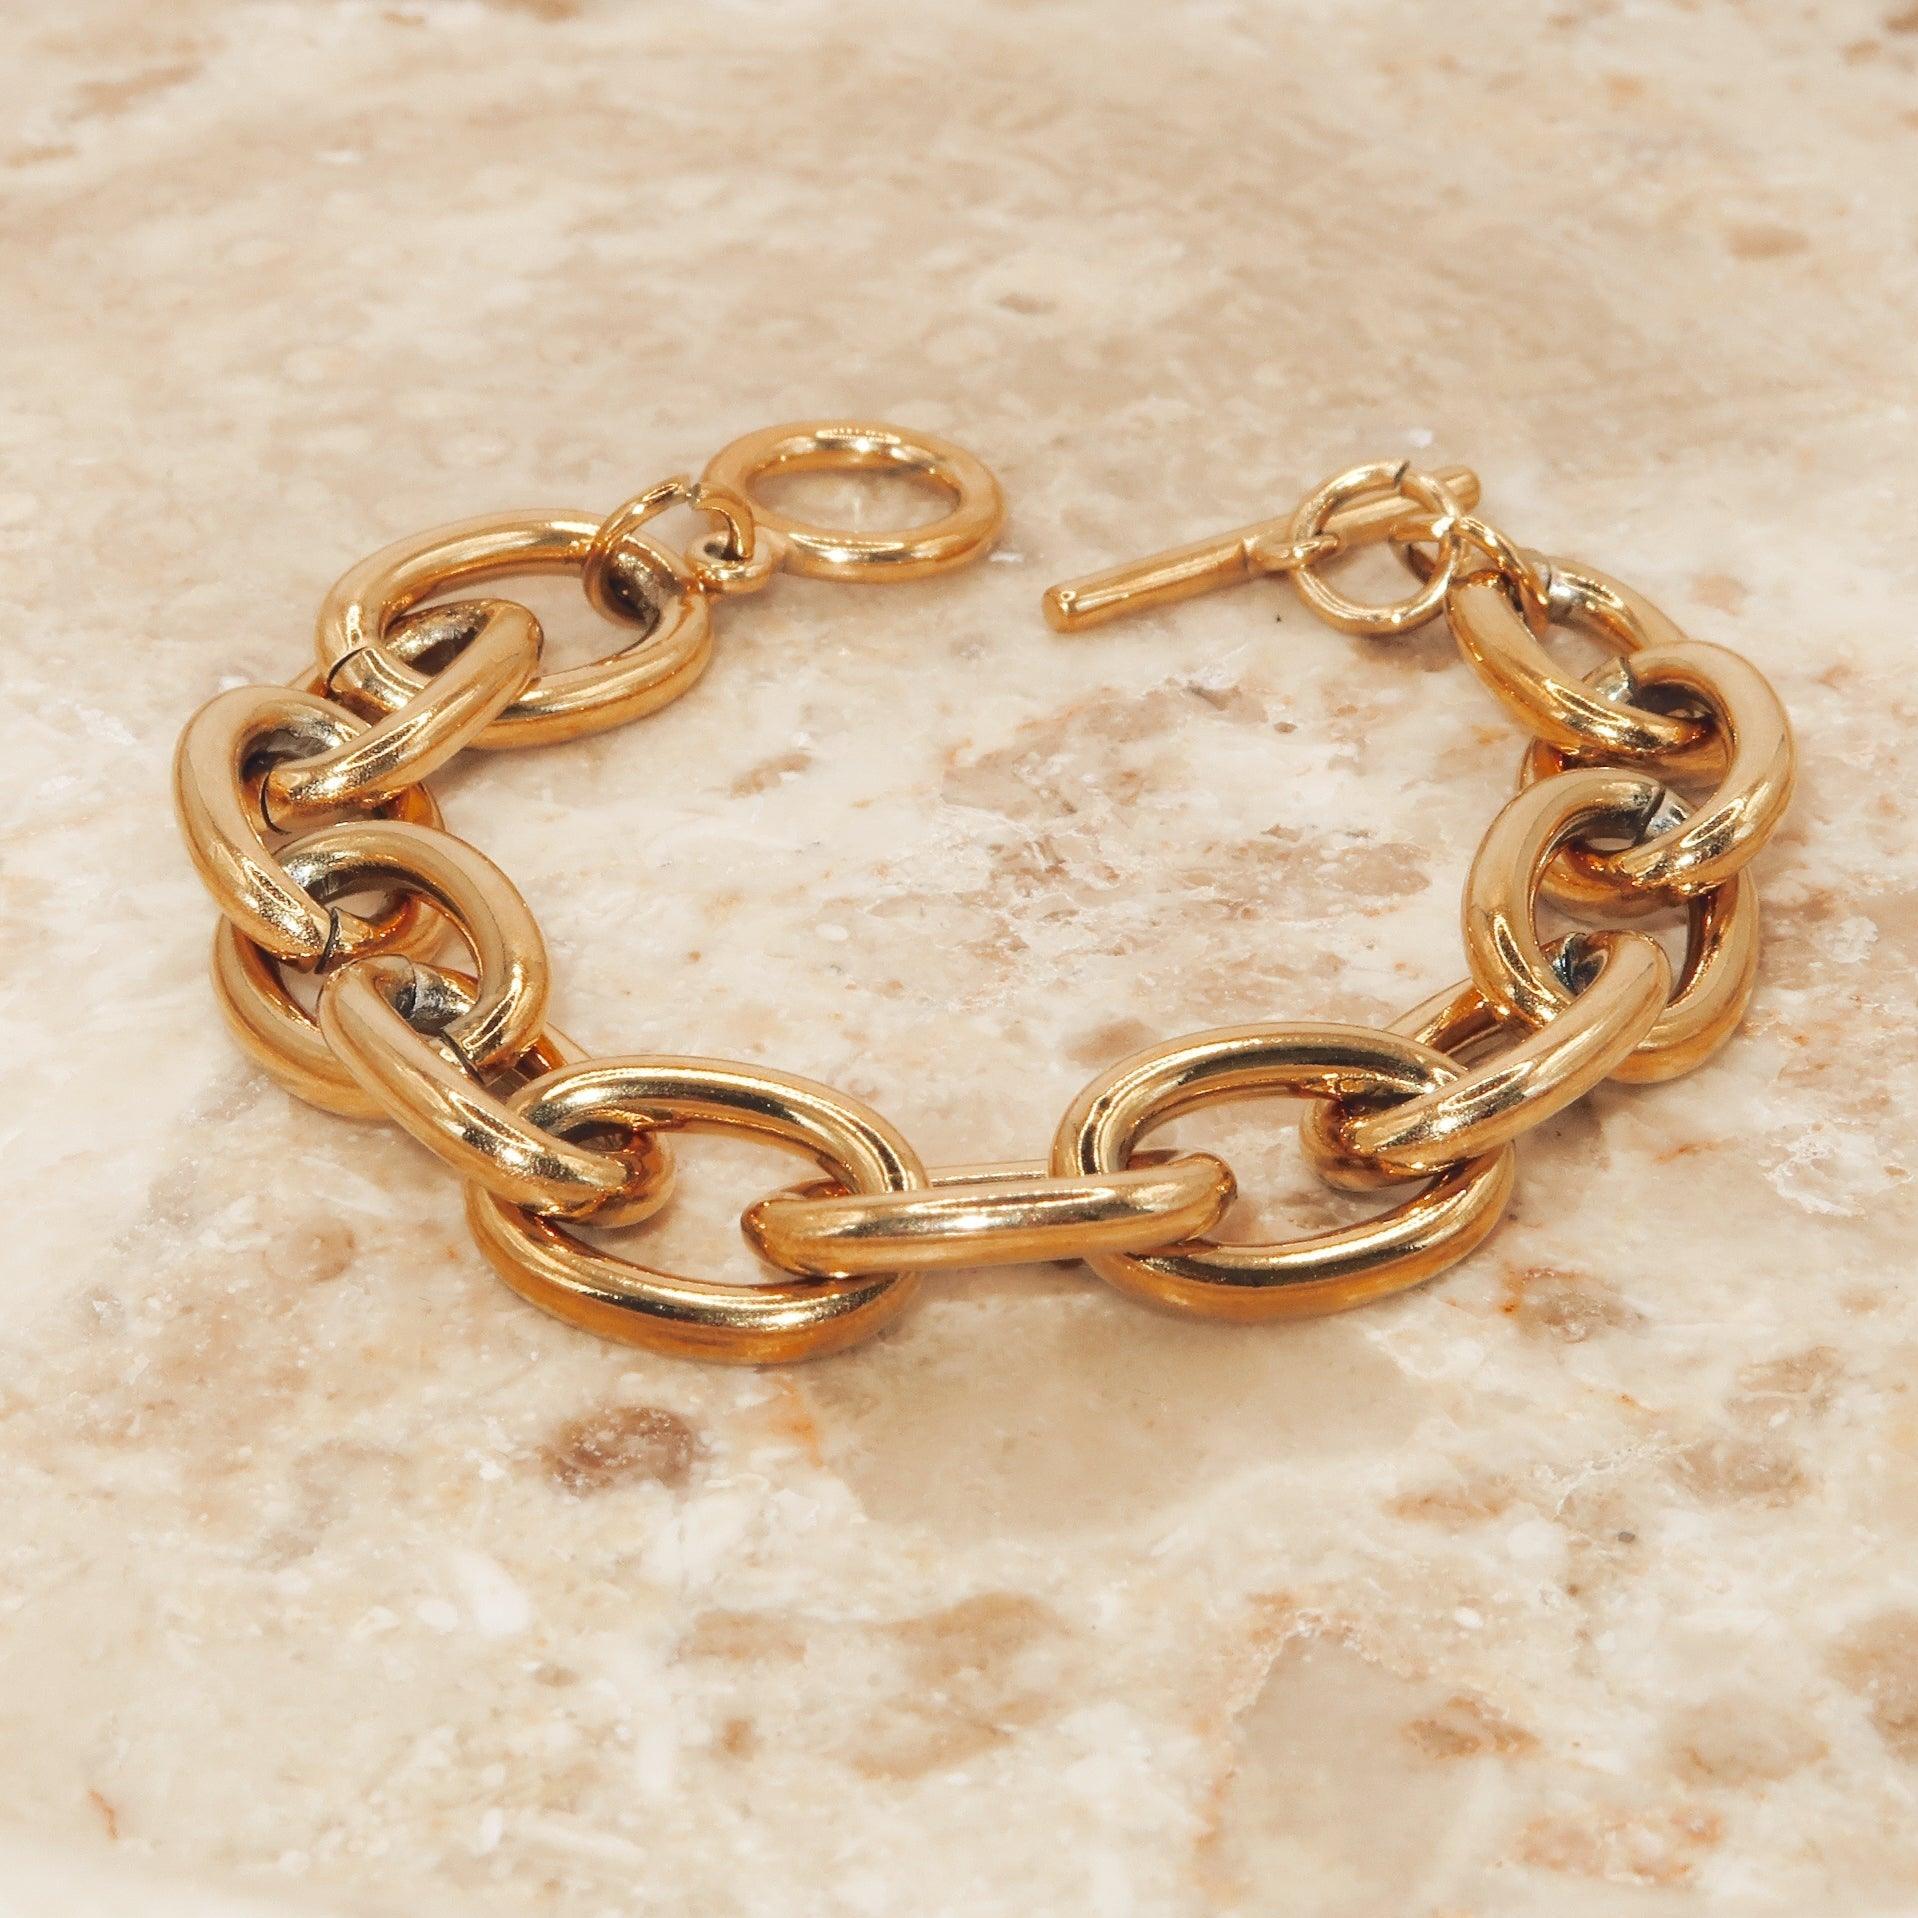 VICTORIA - 18K PVD Gold Plated Chunky Link Chain Bracelet - Mixed Metals